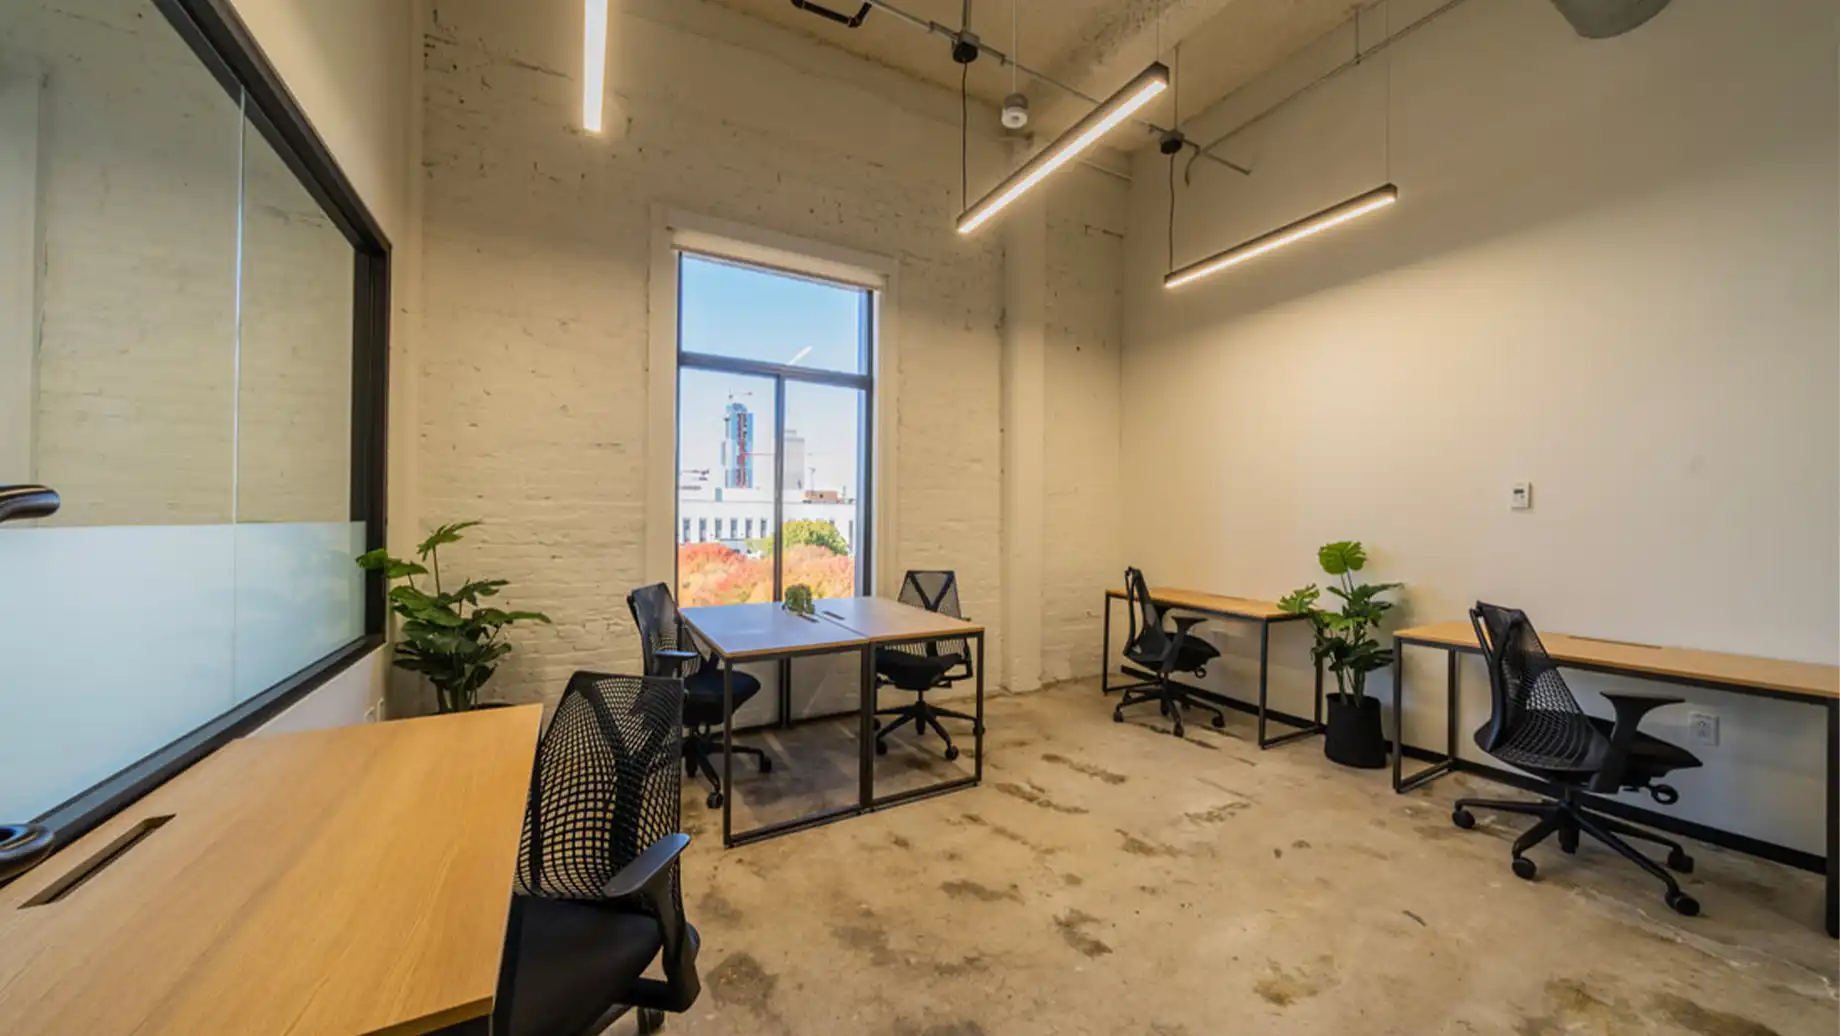 Team Room, he Gulch Nashville Private Office & Coworking Space